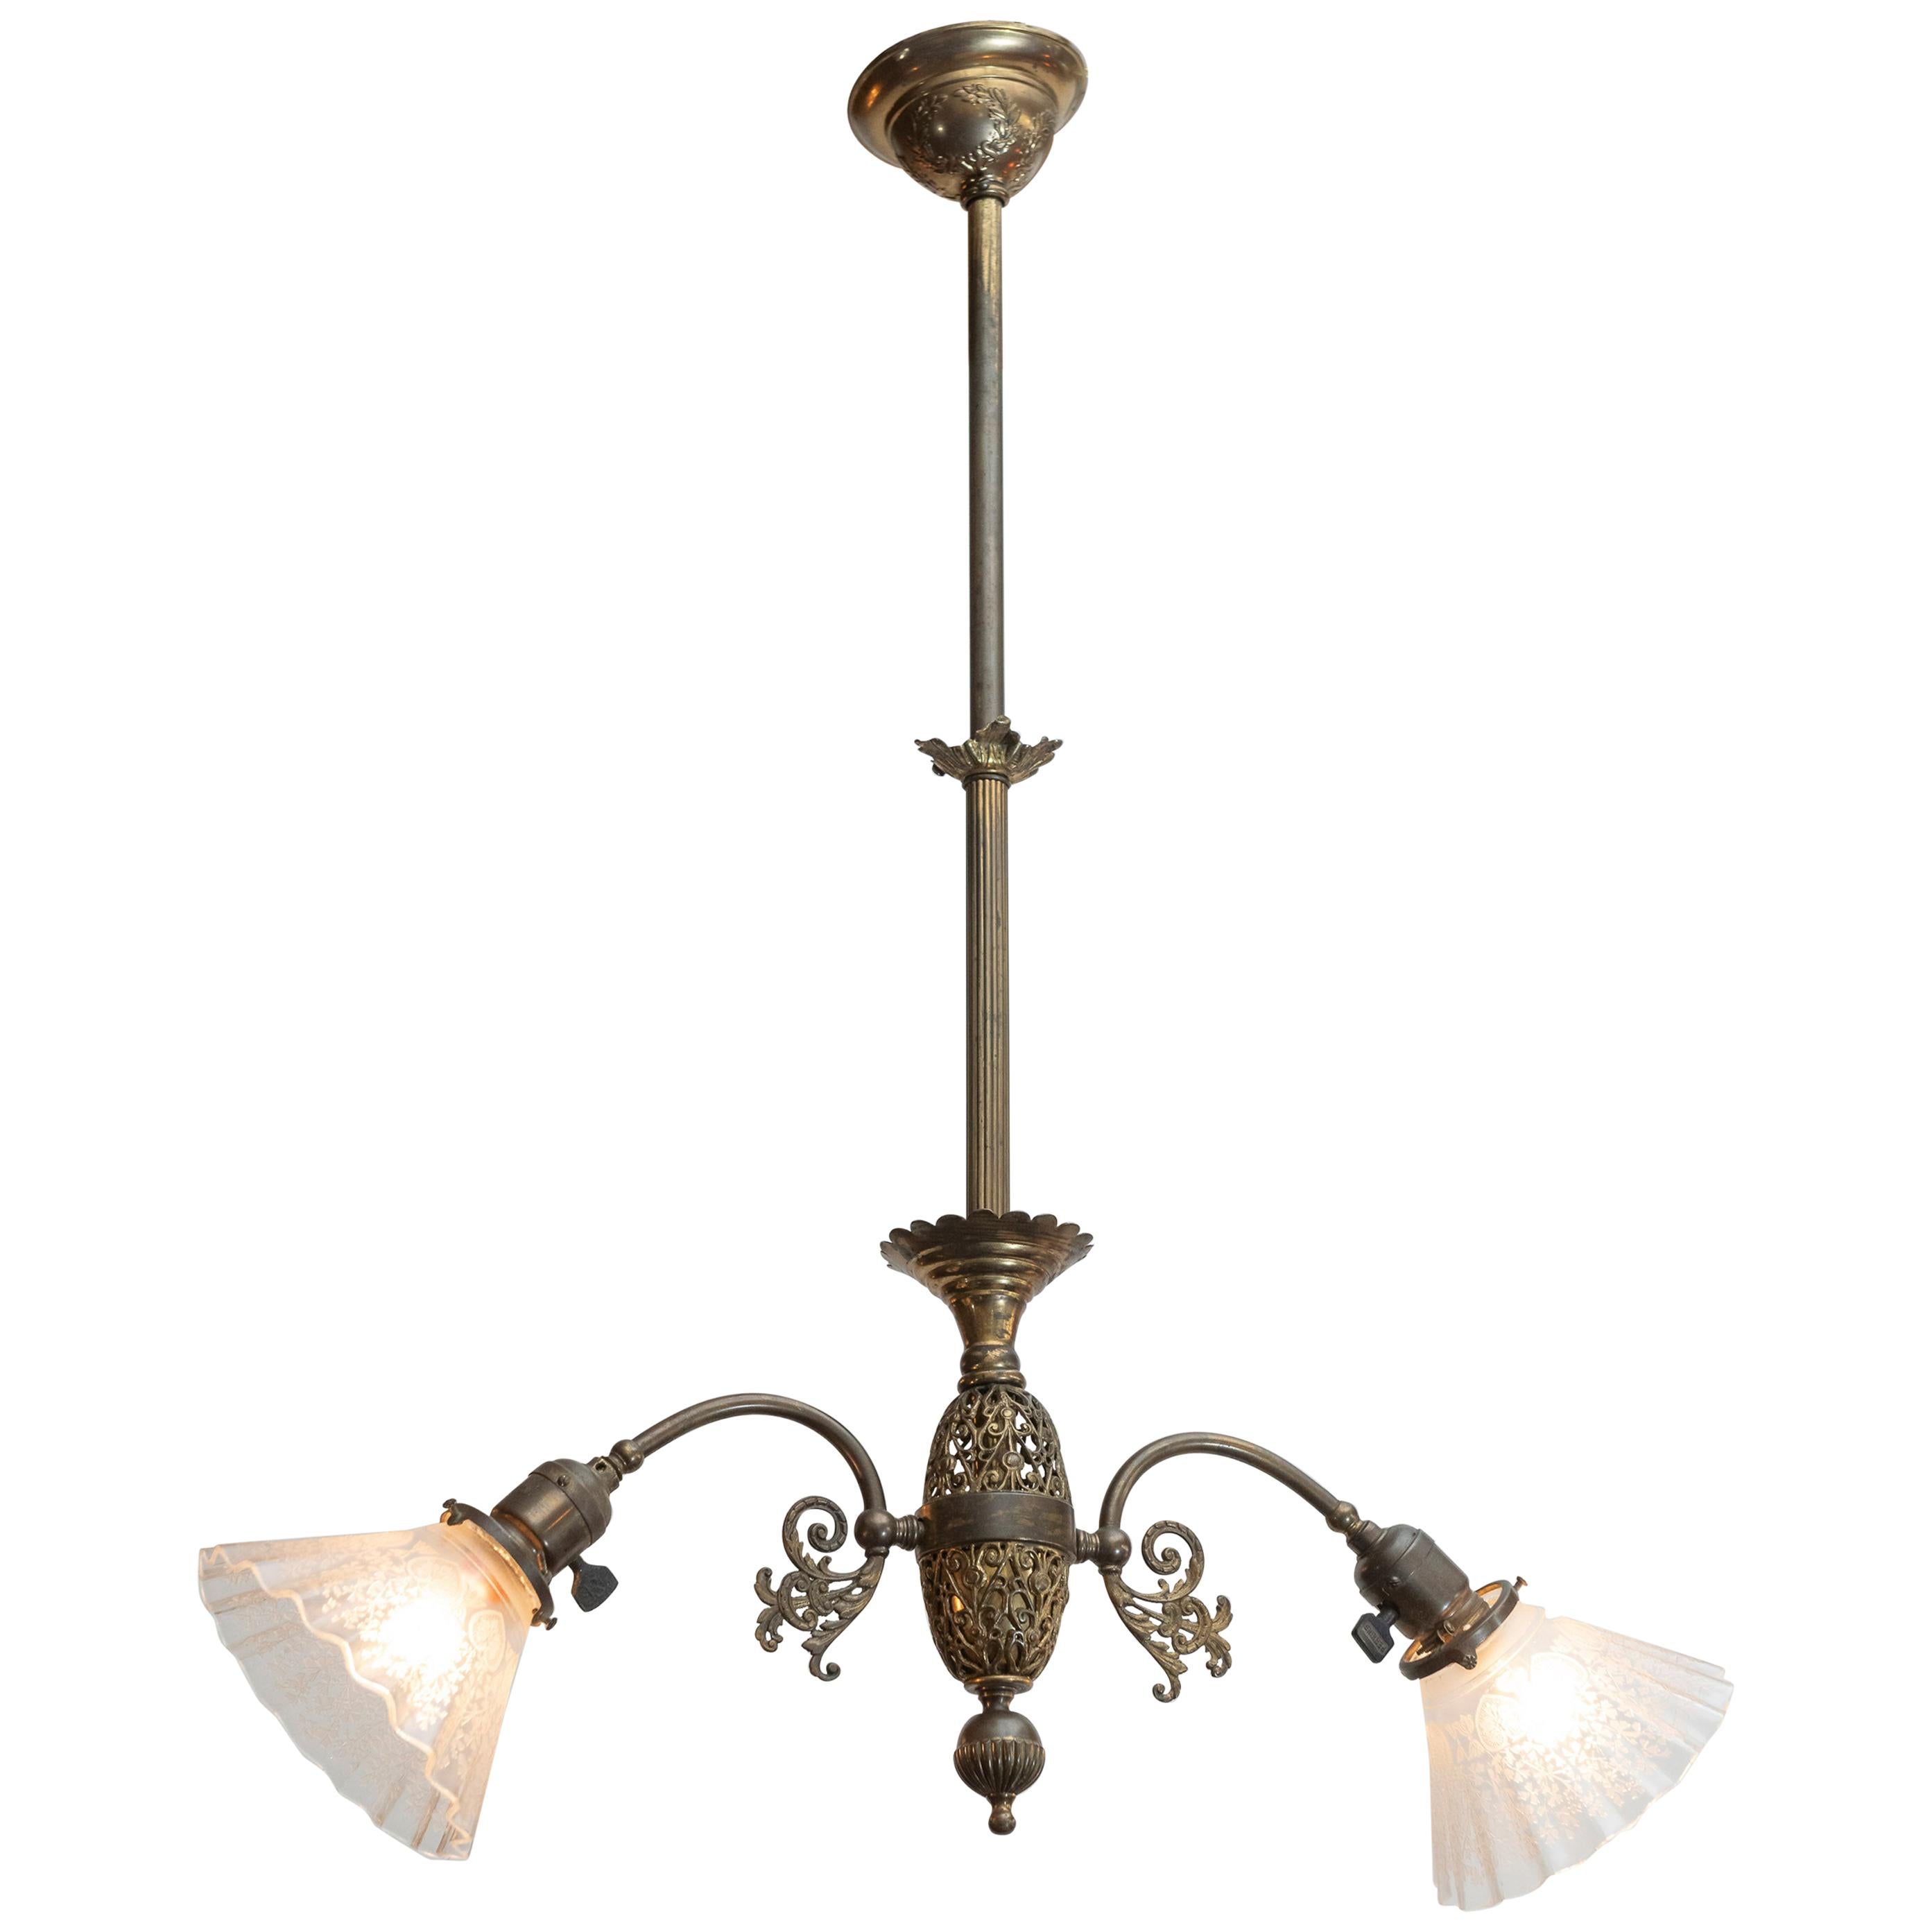 Late Victorian 2-Arm Chandelier with Deep Etched Glass Shades, circa 1900